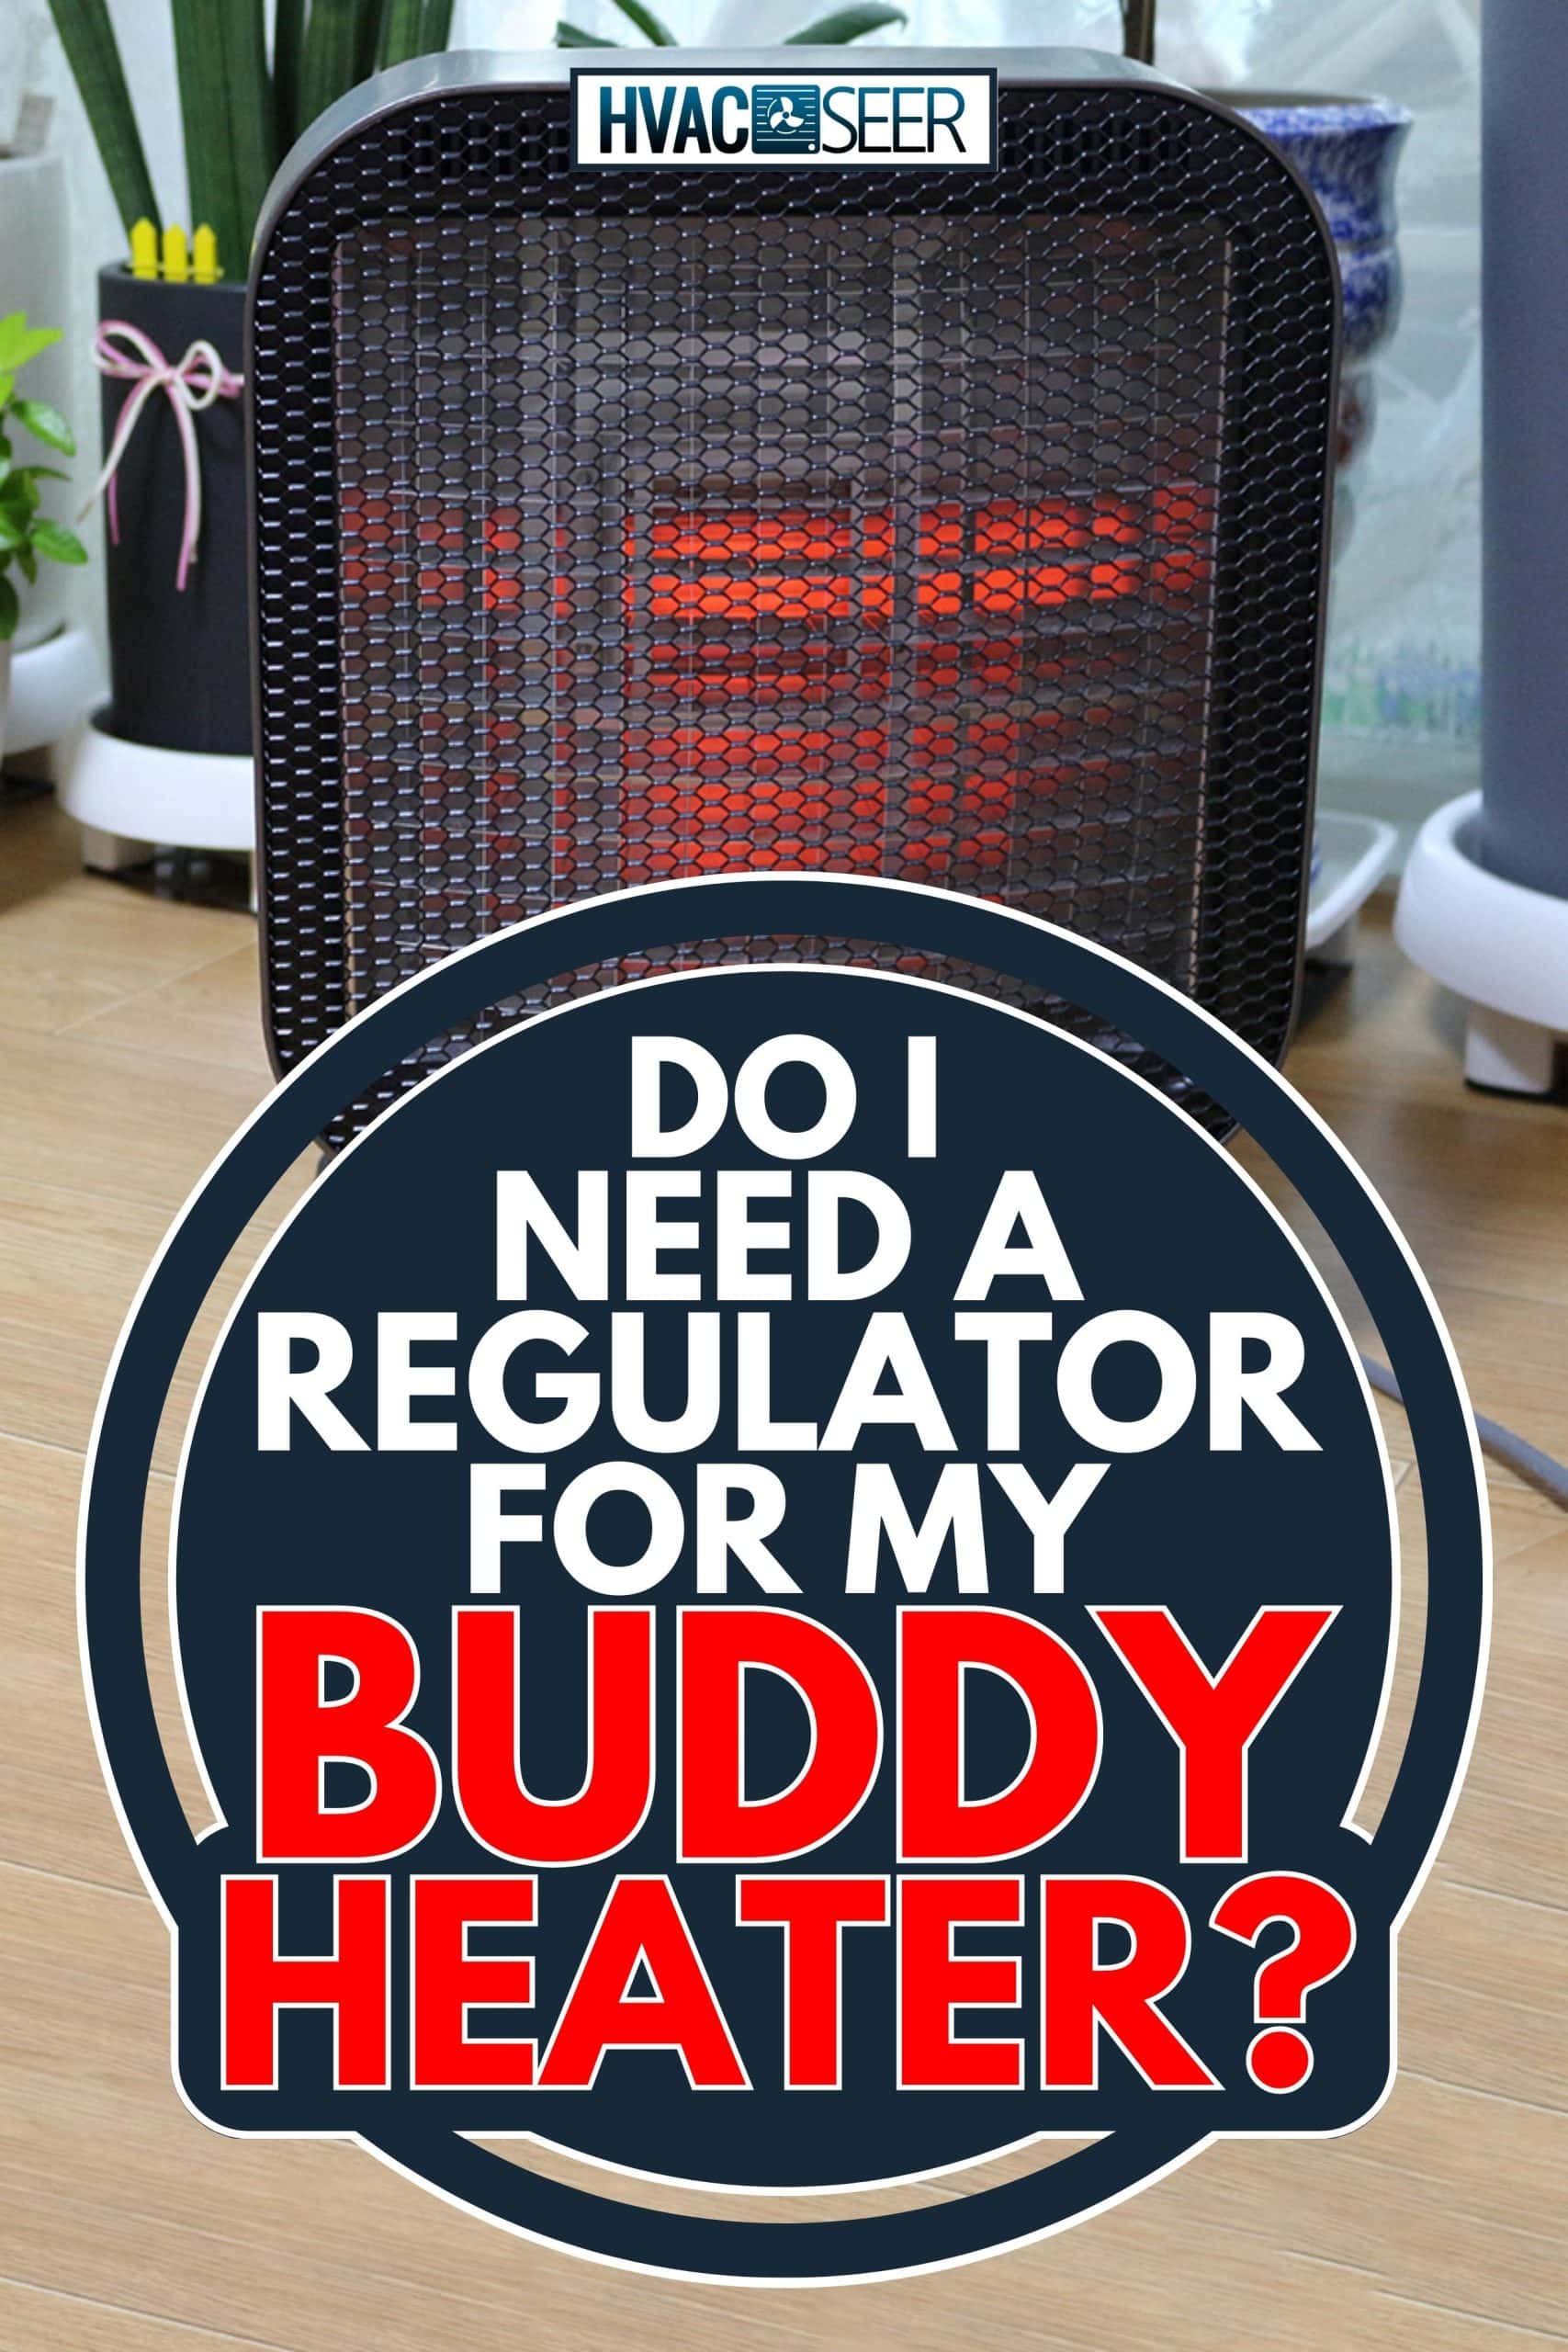 A heater that can warm the air at home, Do I Need A Regulator For My Buddy Heater?